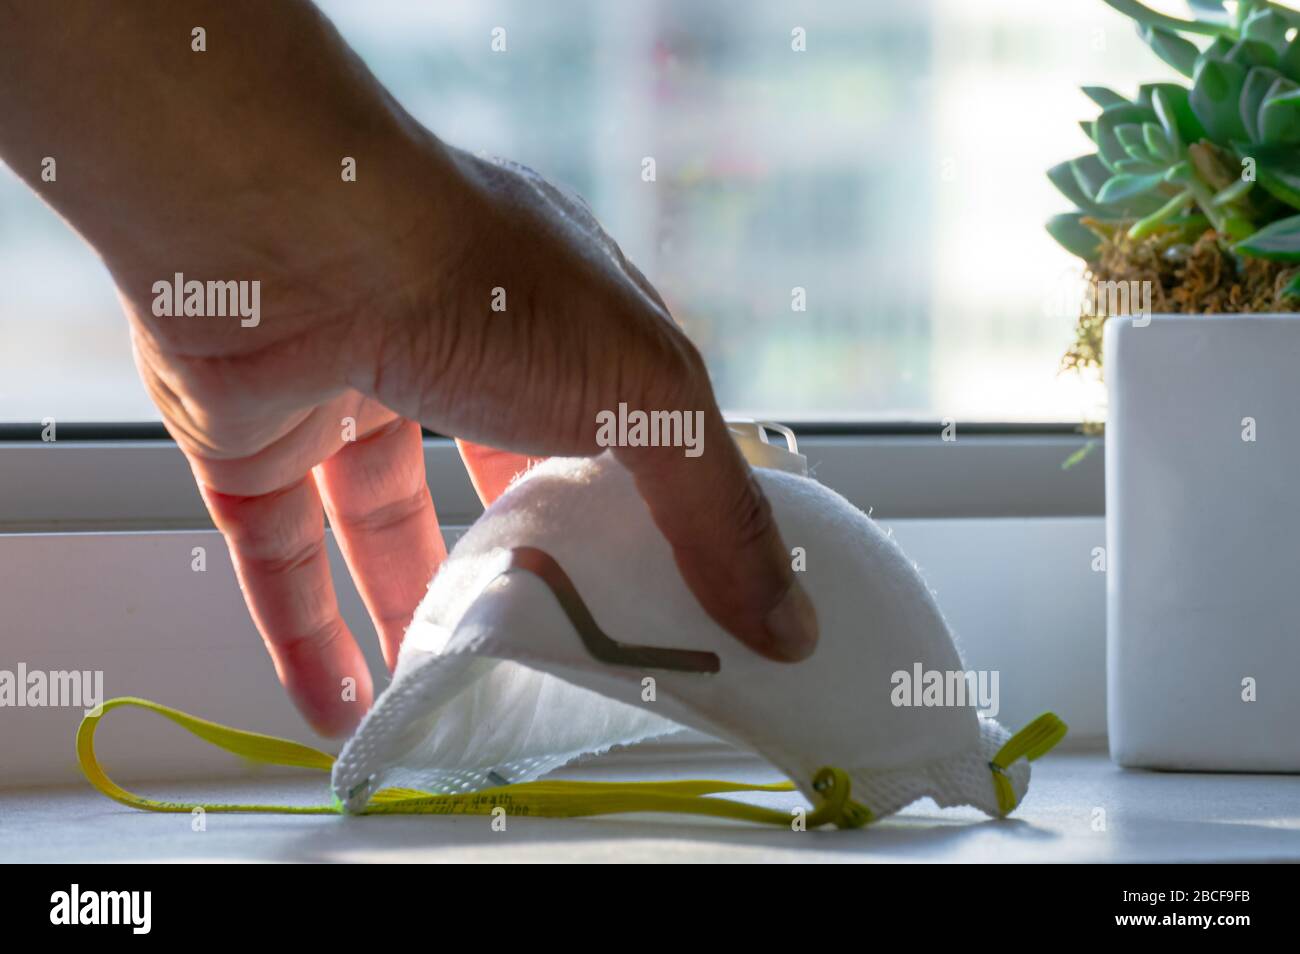 A male hand is picking up an N95 Face mask on a counter. Stock Photo